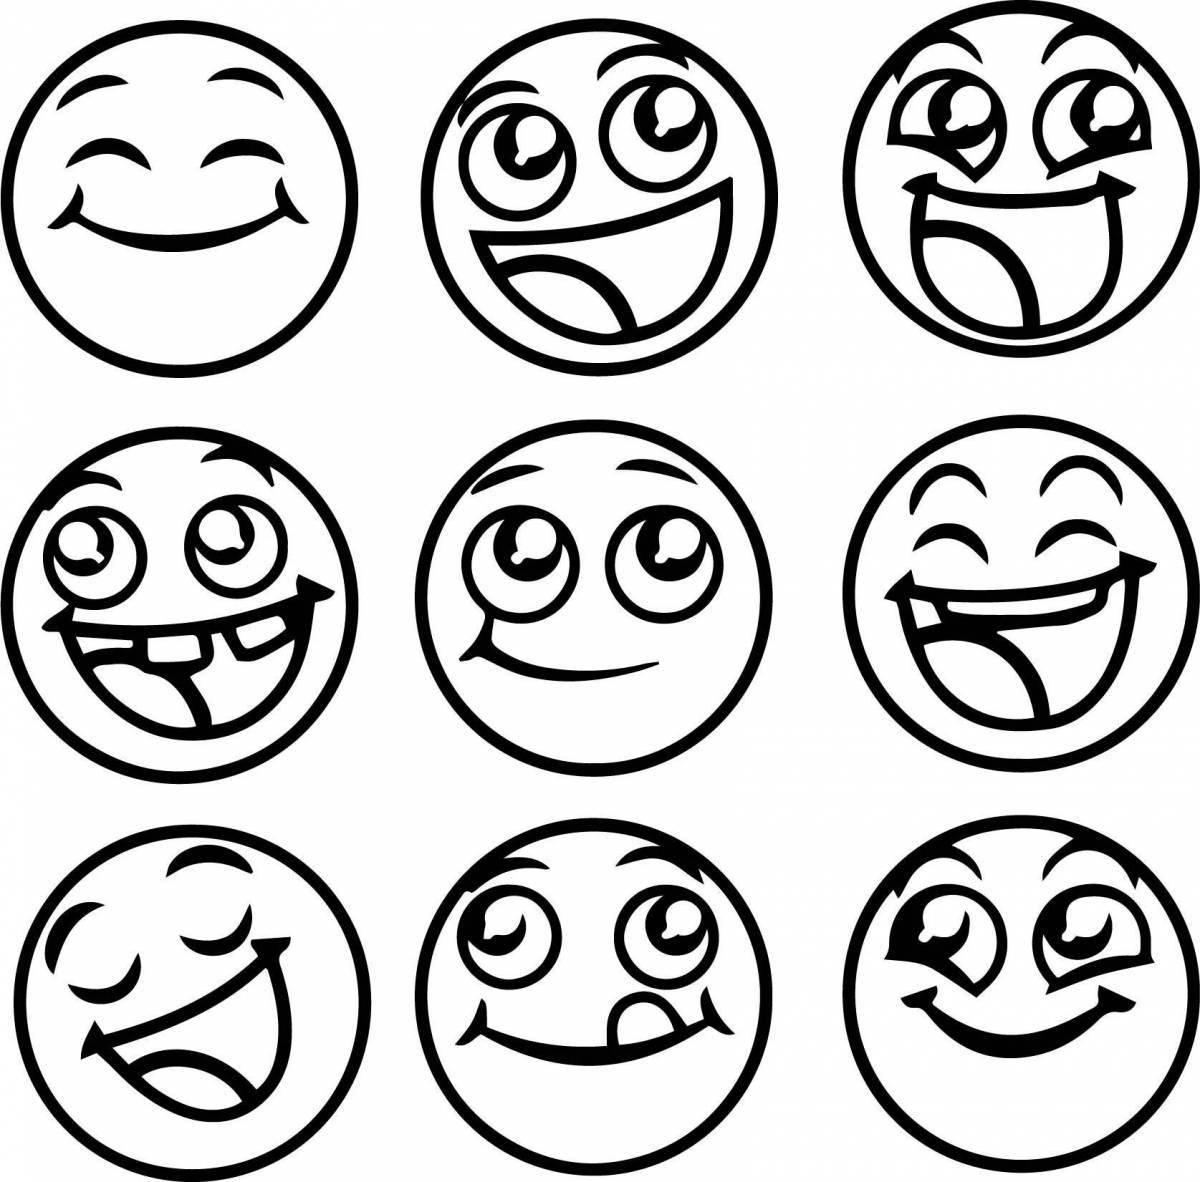 Colorful coloring pages of indie kid emoticons